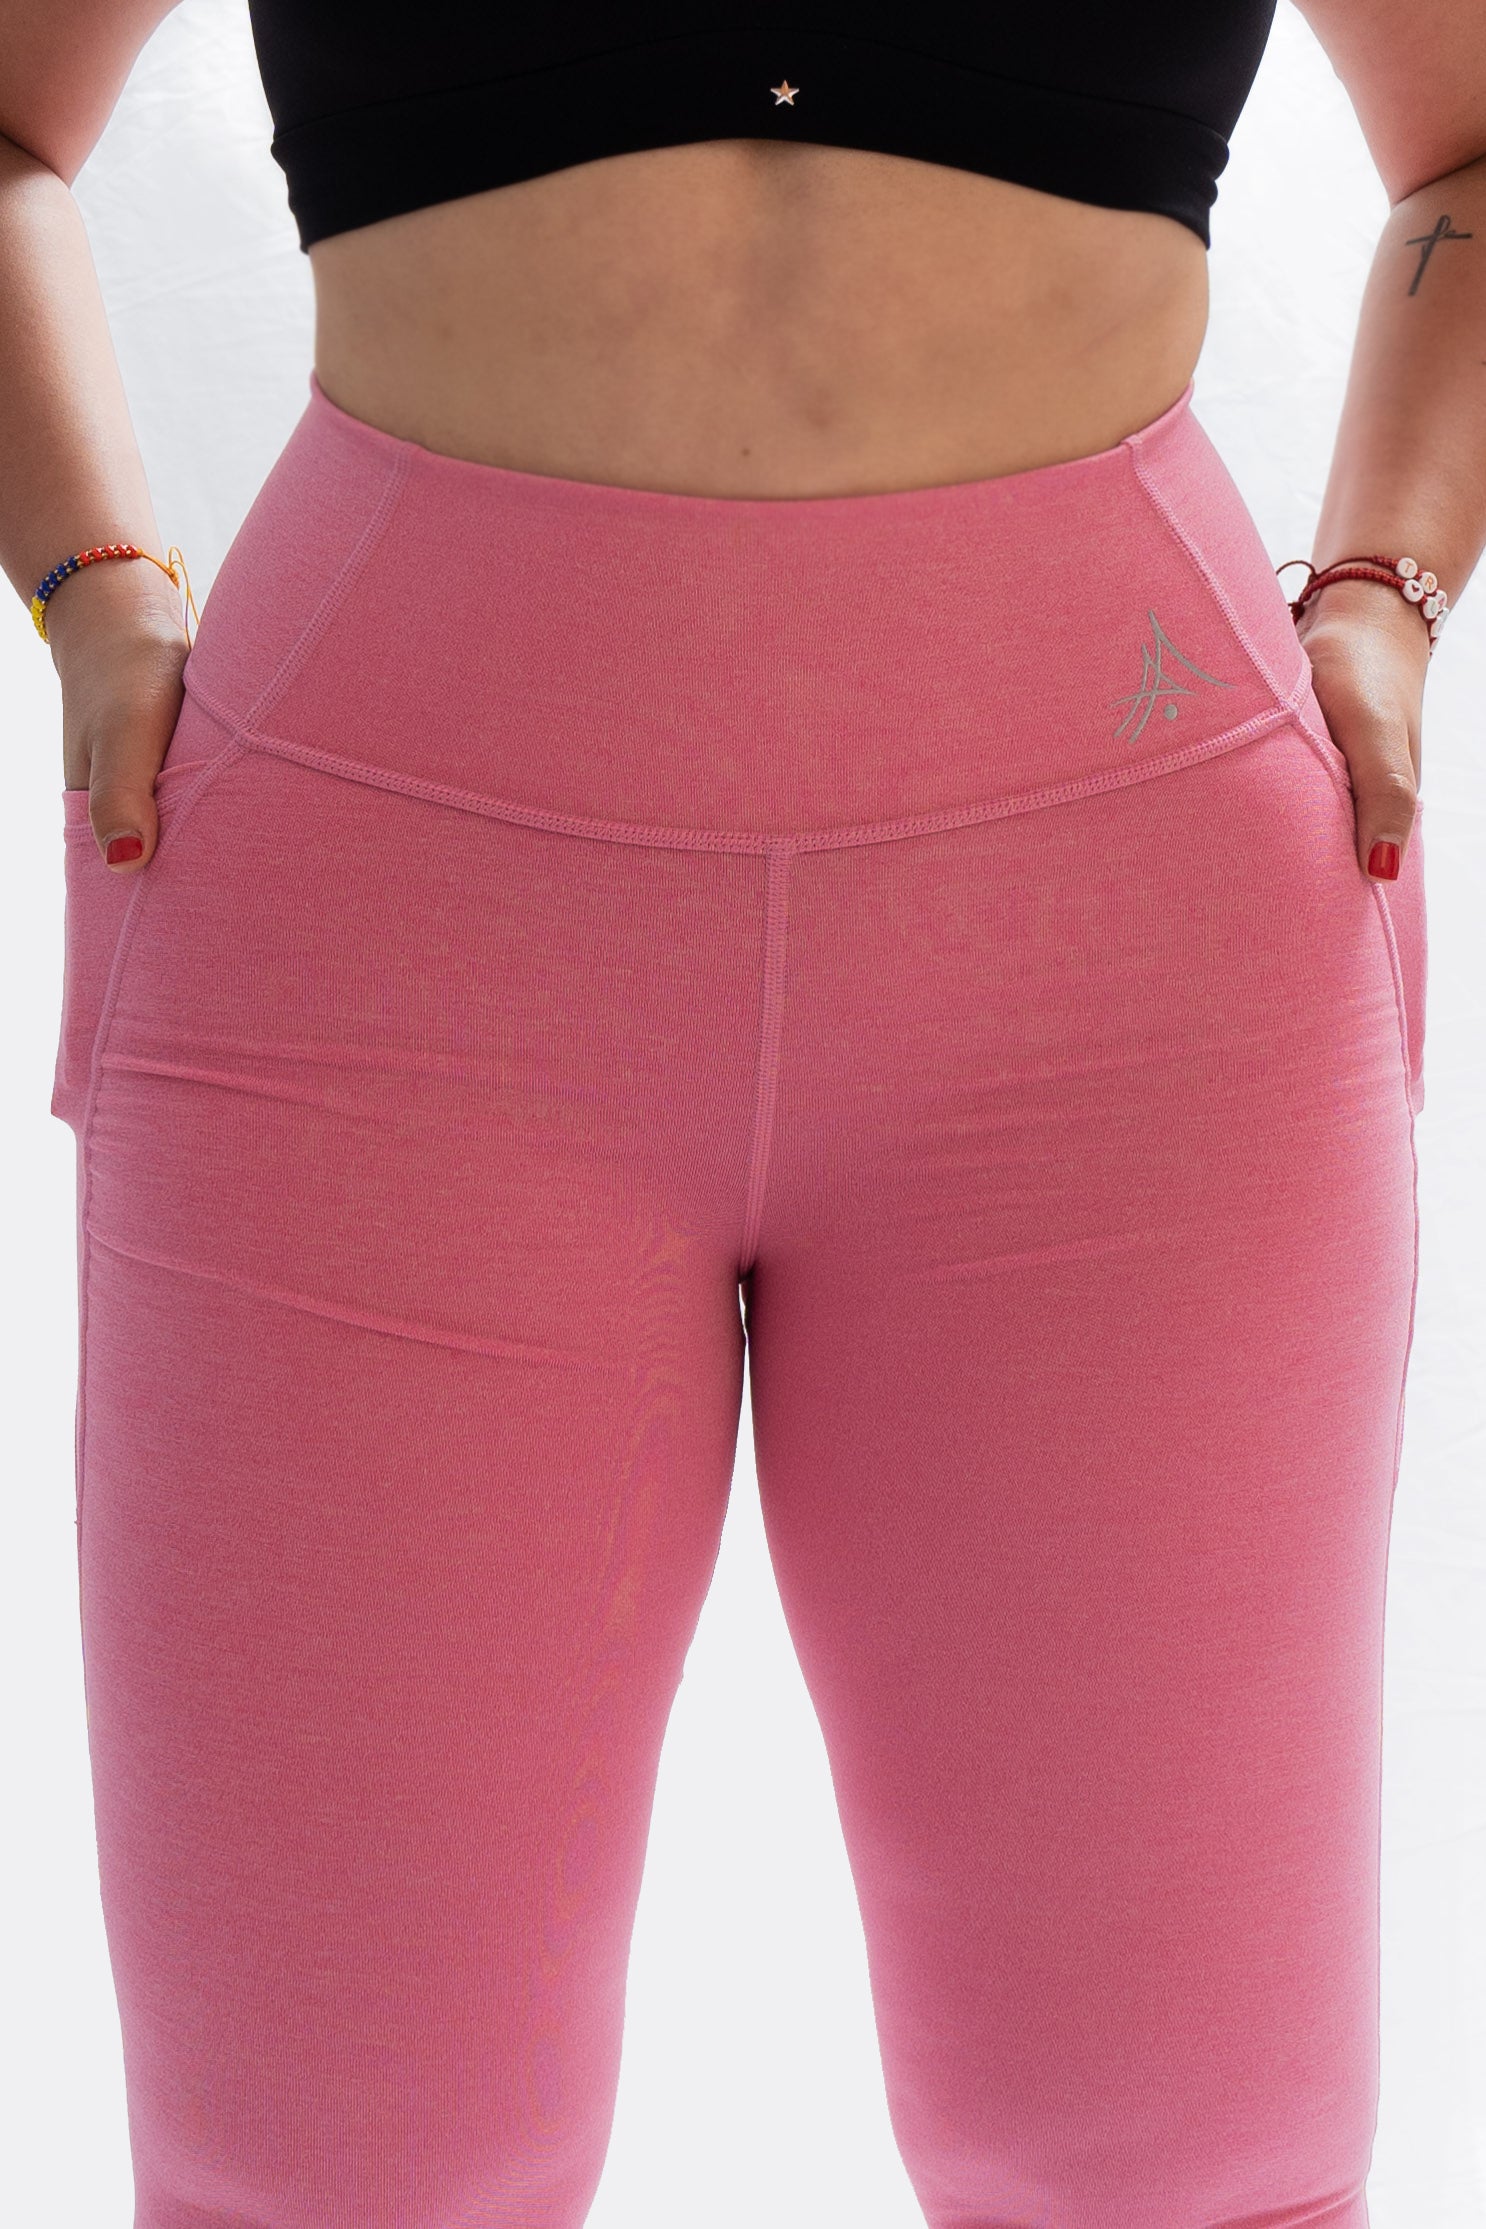 Agile Leggings - PinkS  Pink leggings, Athleisure wear, Compression tights